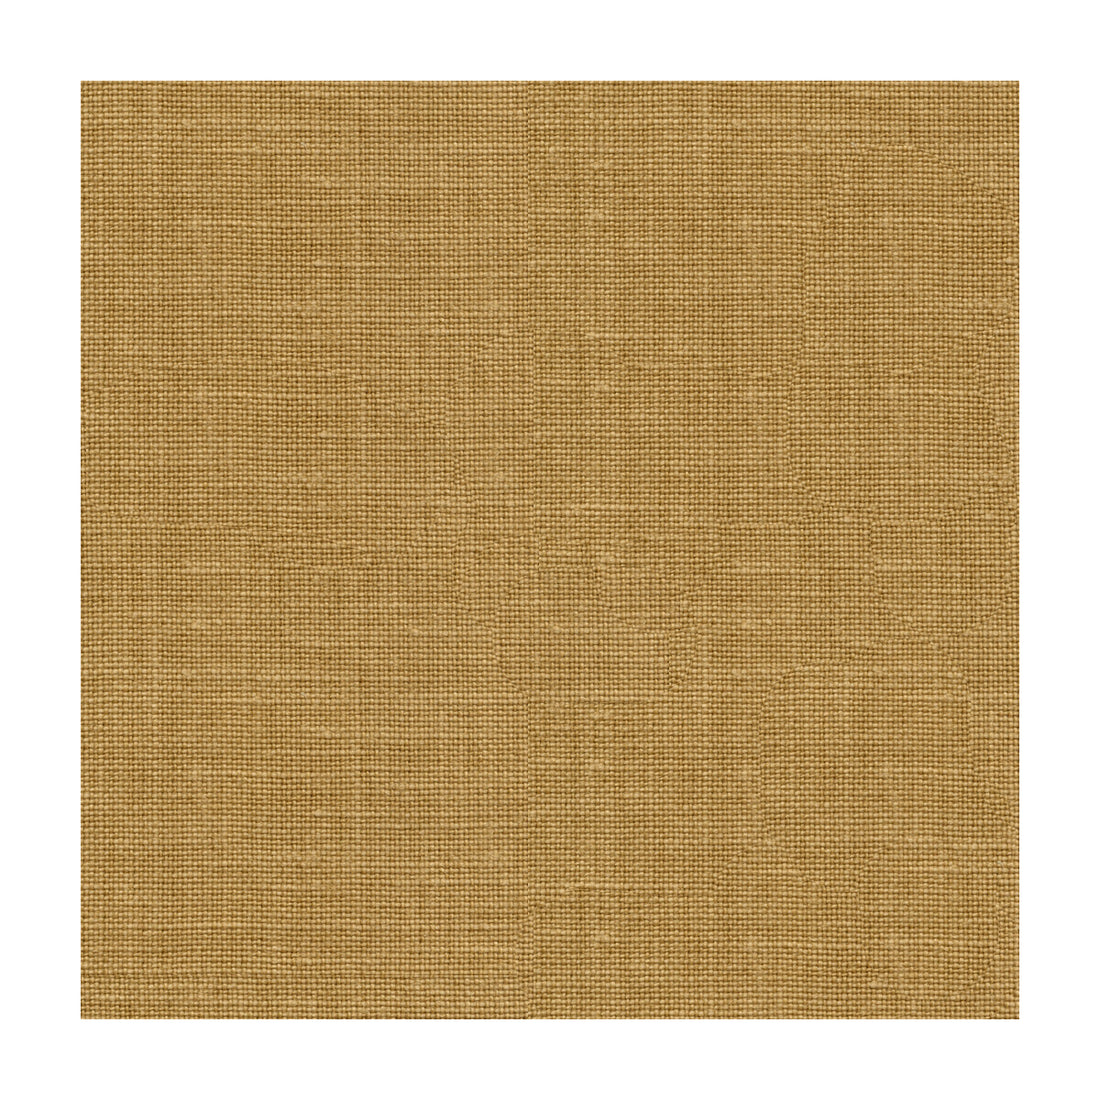 Kravet Basics fabric in 33767-106 color - pattern 33767.106.0 - by Kravet Basics in the Perfect Plains collection